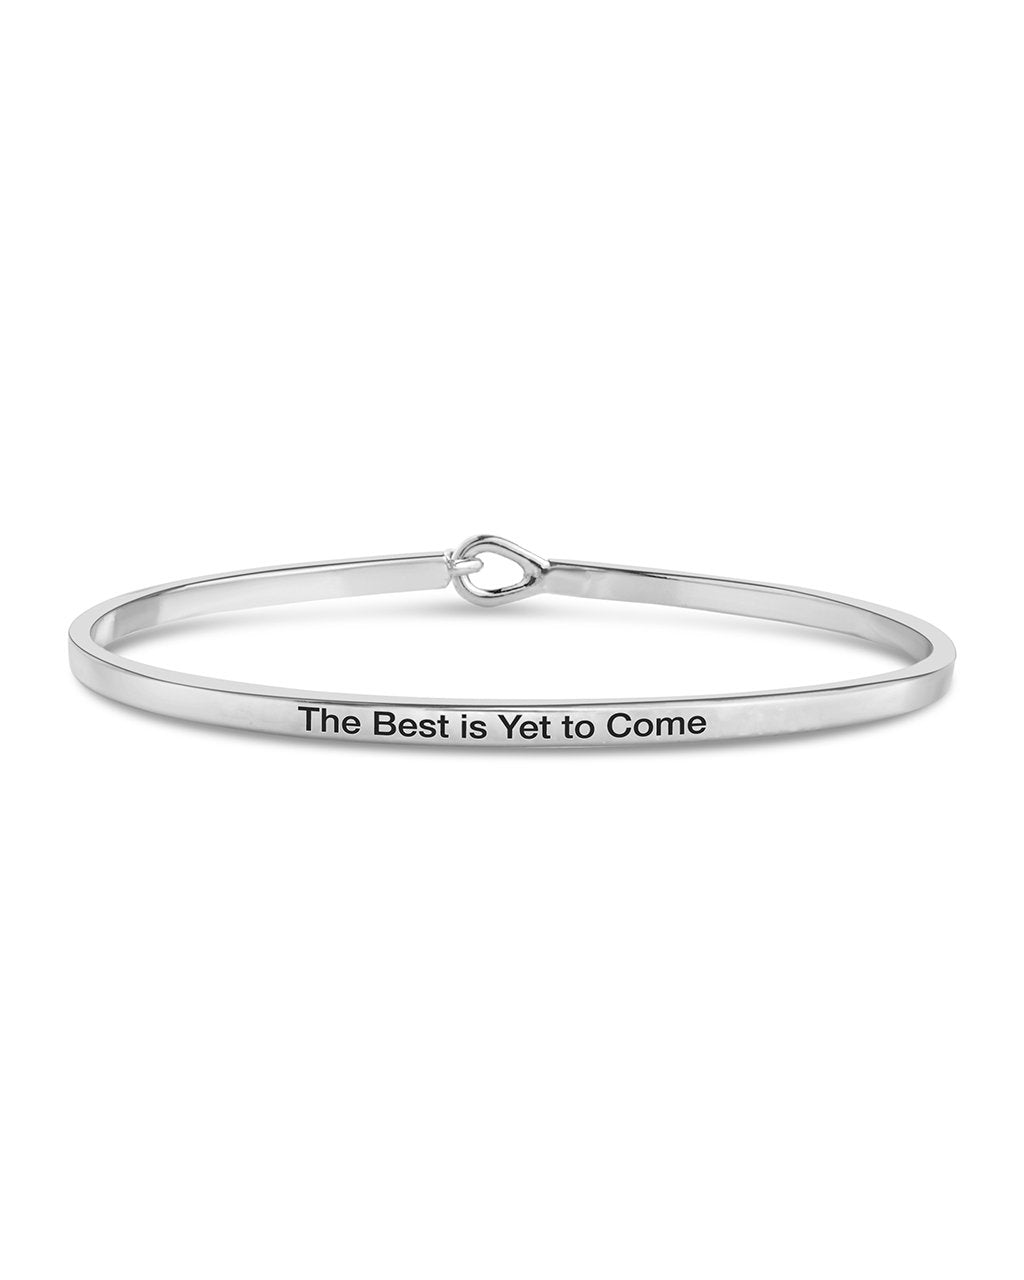 Buy Wow Myjewel Inspirational Silver Metal Stainless Steel Cuff Bangle  Bracelet with Mantra Quote for Women at